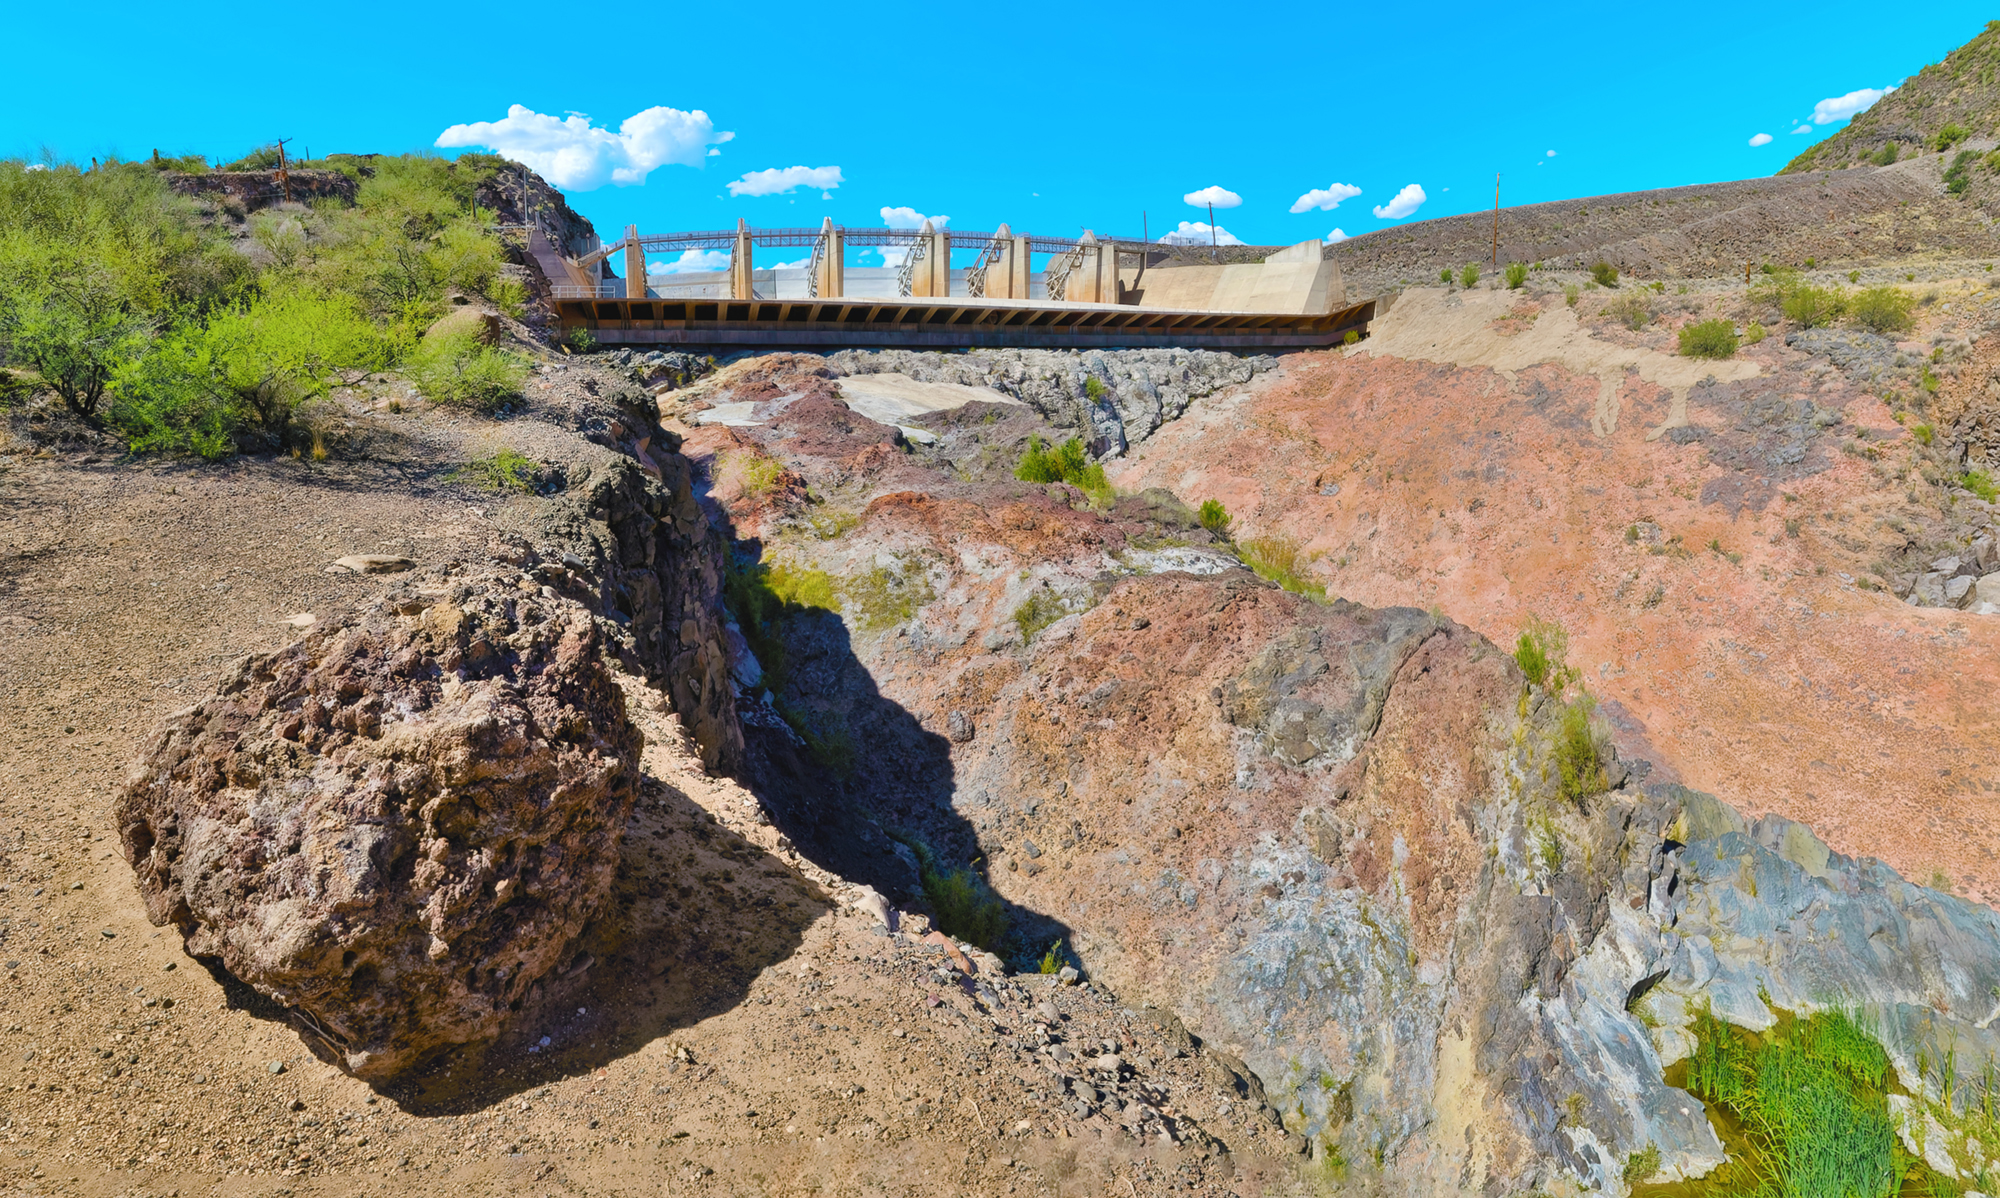 Photo by Harry Dennis Taylor Jr  |  Wide angle stitch job of several wide angle photos taken below the Horseshoe Lake spillway.